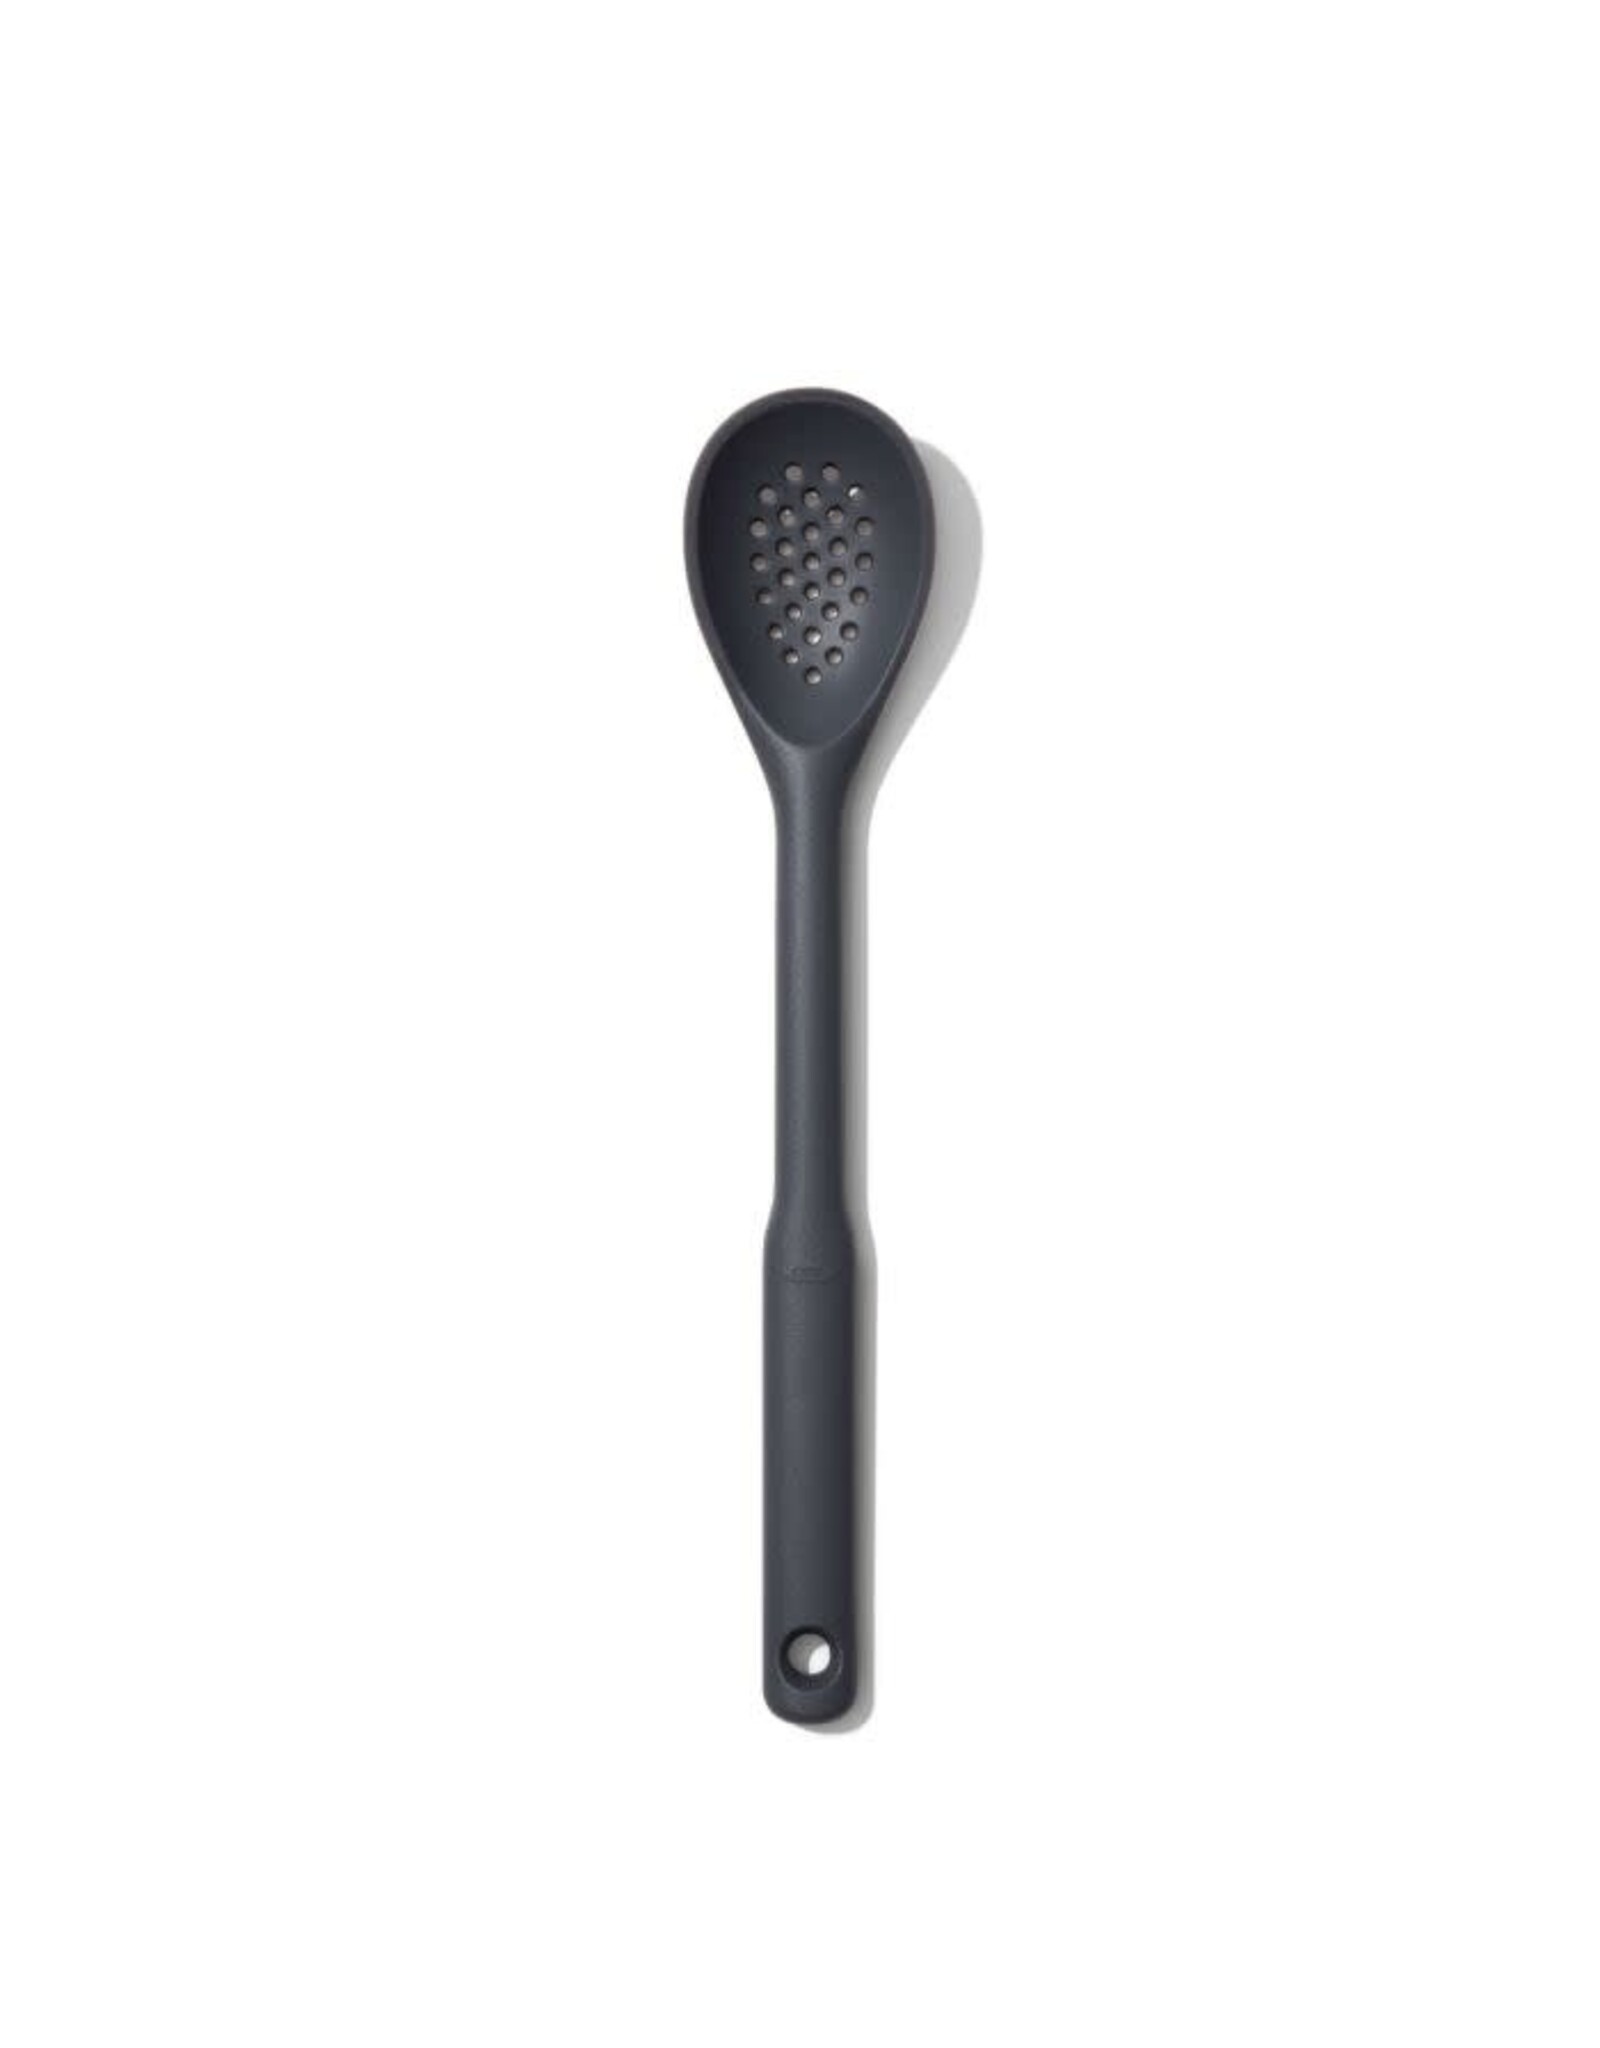 OXO OXO Silicone Slotted Spoon